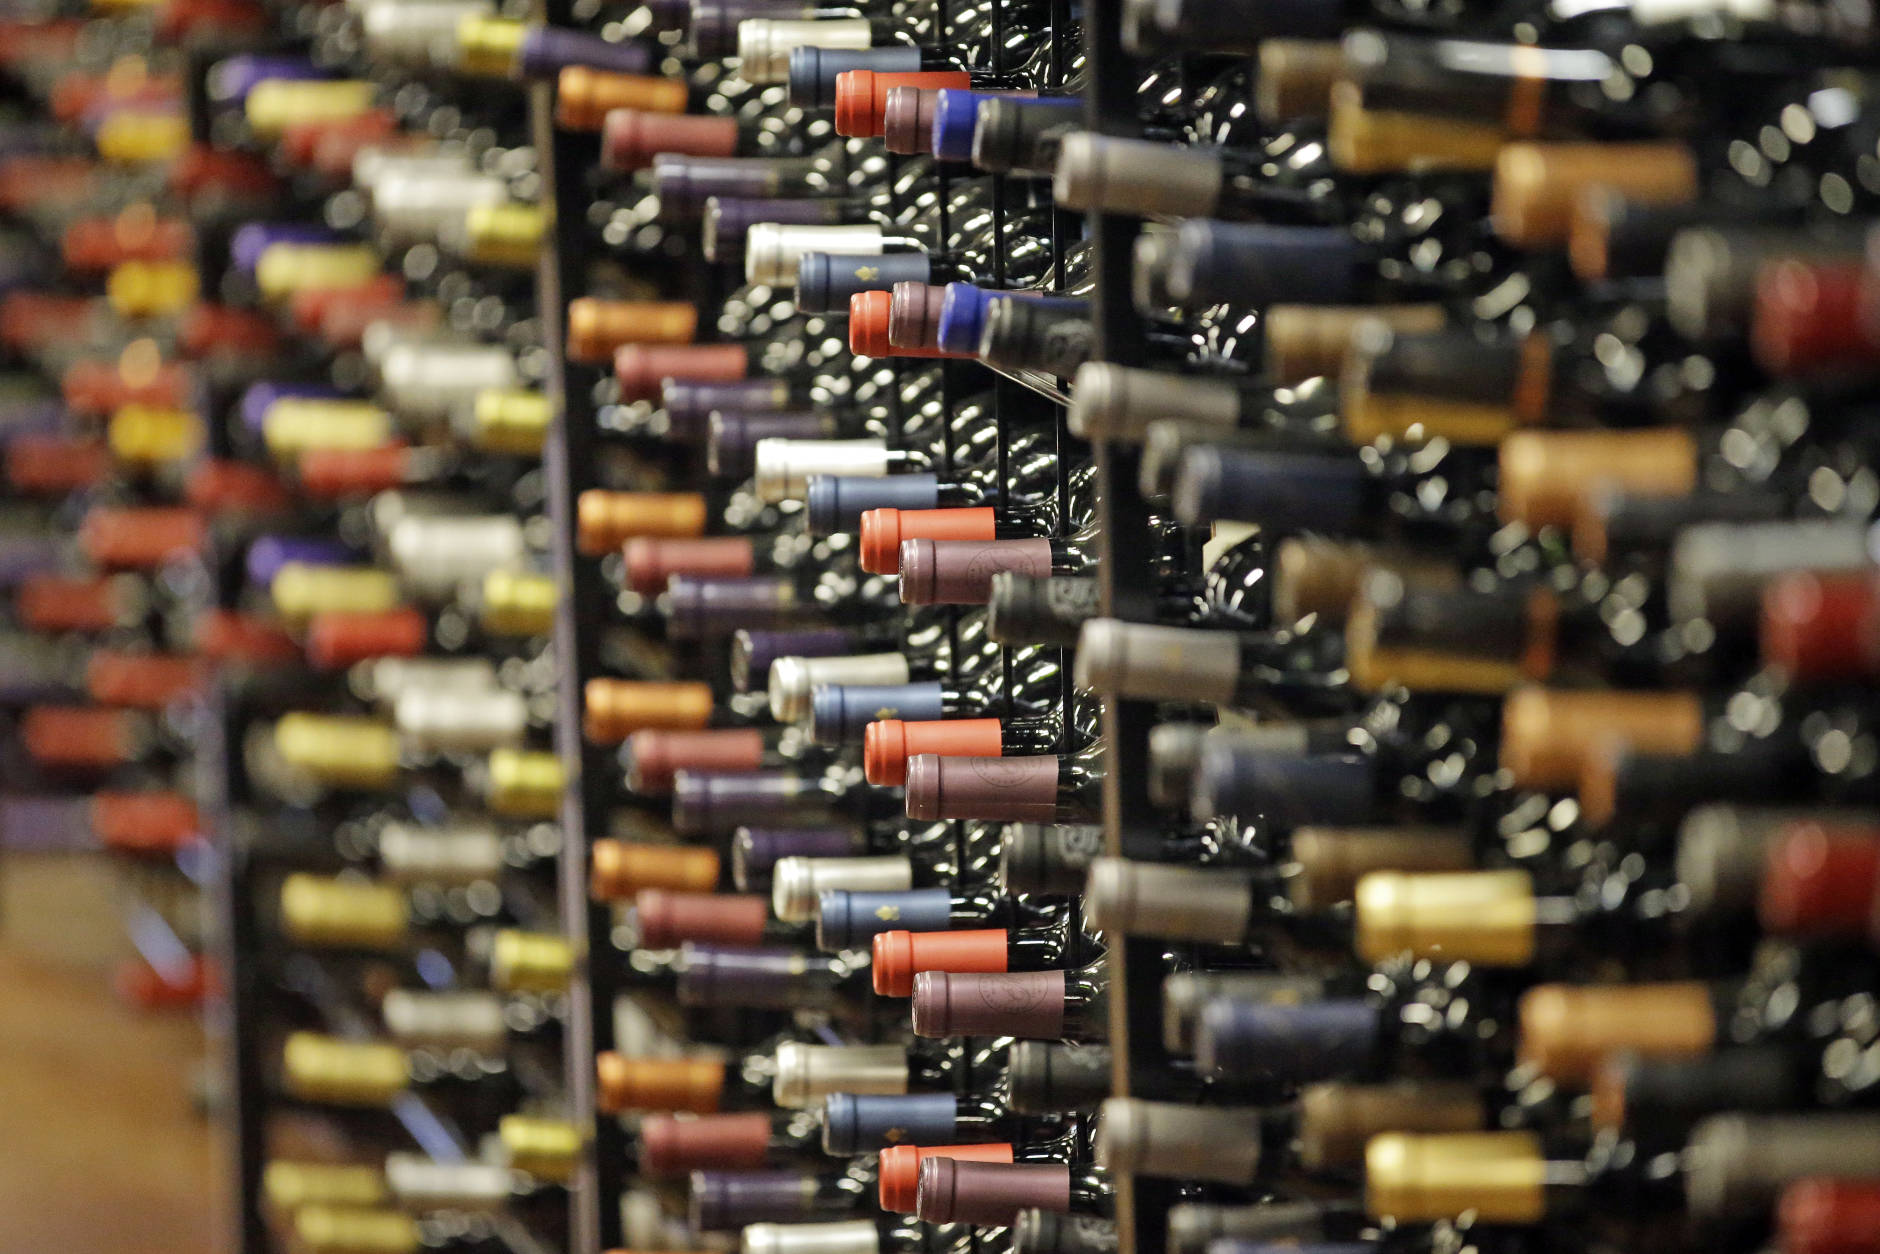 FILE - In this June 16, 2016, file photo, bottles of wine are displayed during a tour of a state liquor store, in Salt Lake City. Cheap liquor, wine and beer have long been best-sellers among Utah alcohol drinkers, but new numbers from Utah's tightly-controlled liquor system show local craft brews, trendy box wines and flavored whiskies are also popular choices in a largely teetotaler state. (AP Photo/Rick Bowmer, File)